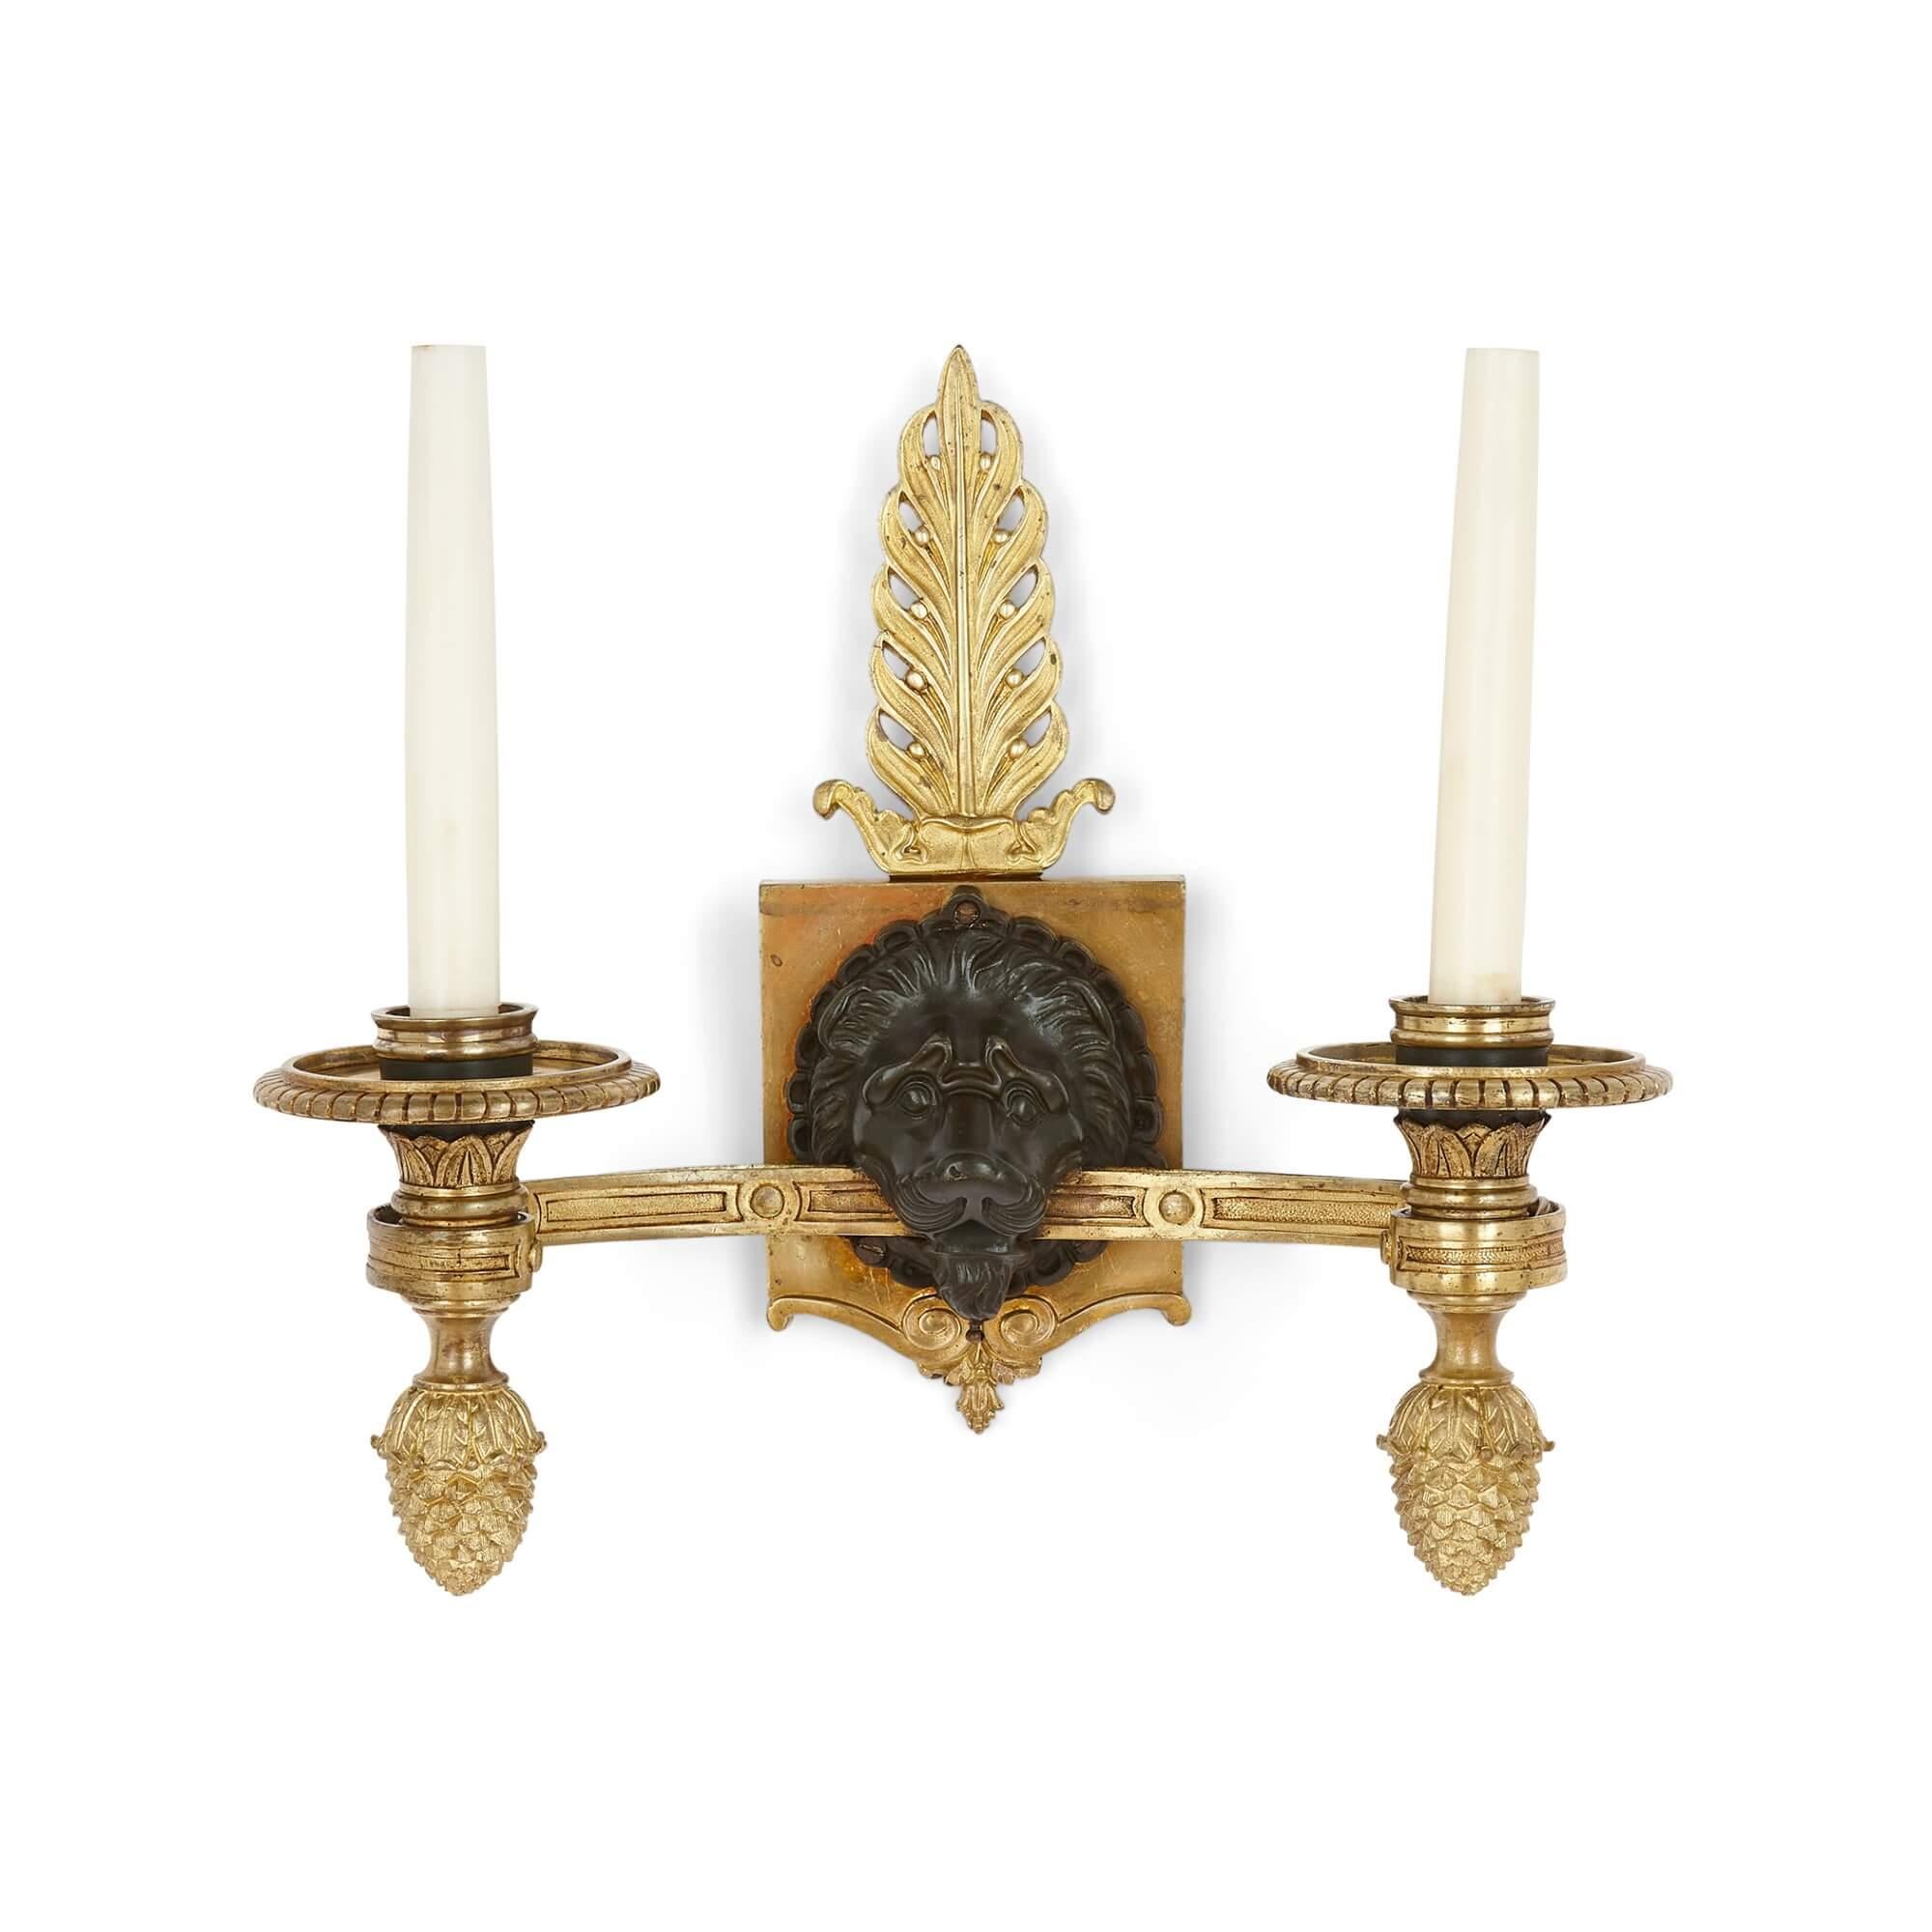 Gilt and patinated bronze Empire-style wall lights 
French, Early 20th century
Height 35cm, width 36cm, depth 20cm

This pair of wall lights or sconces are modeled in the opulent French Empire style. Each takes the form of two-light gilt bronze